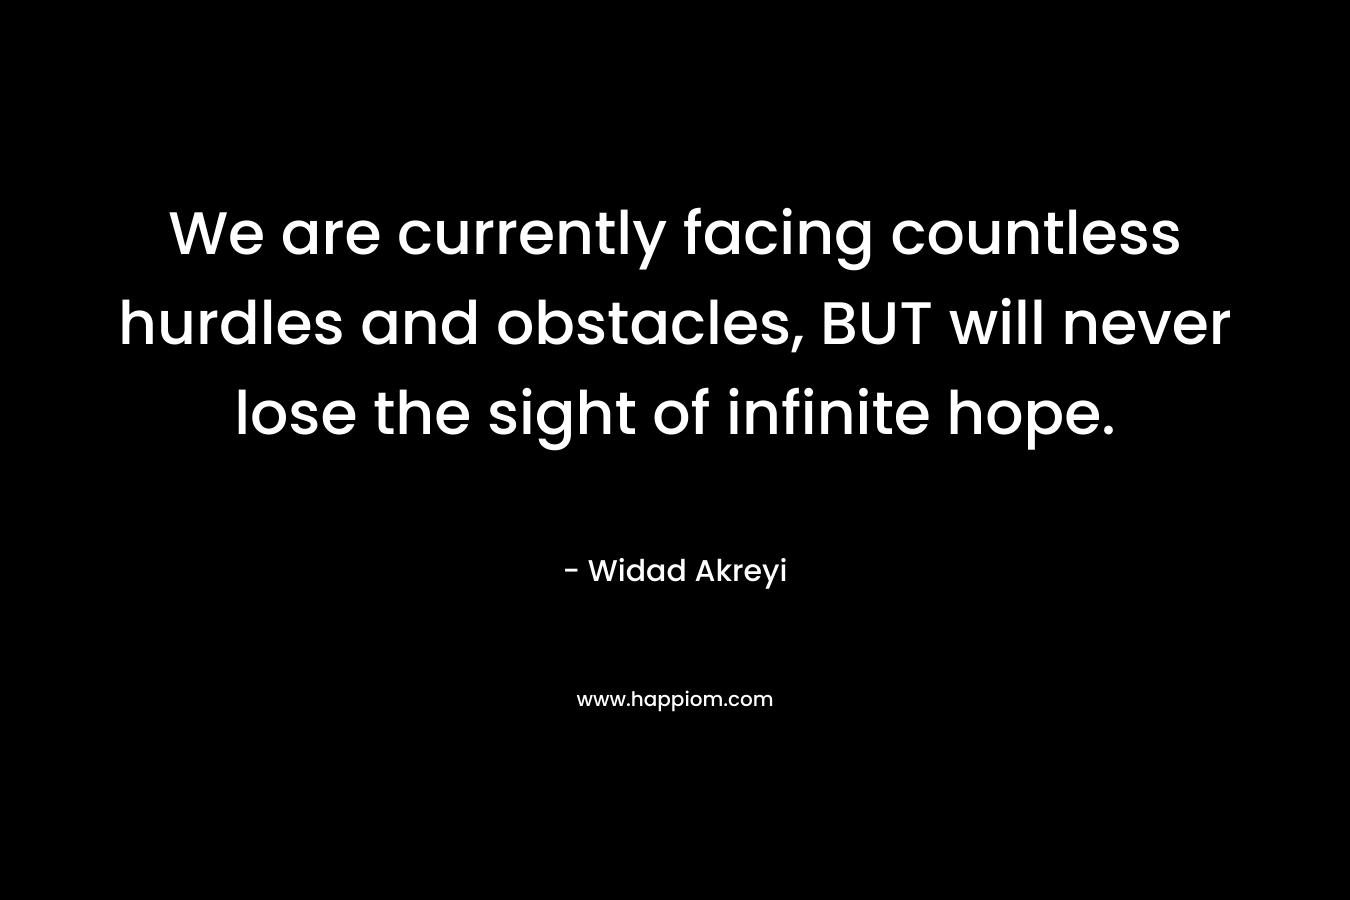 We are currently facing countless hurdles and obstacles, BUT will never lose the sight of infinite hope.